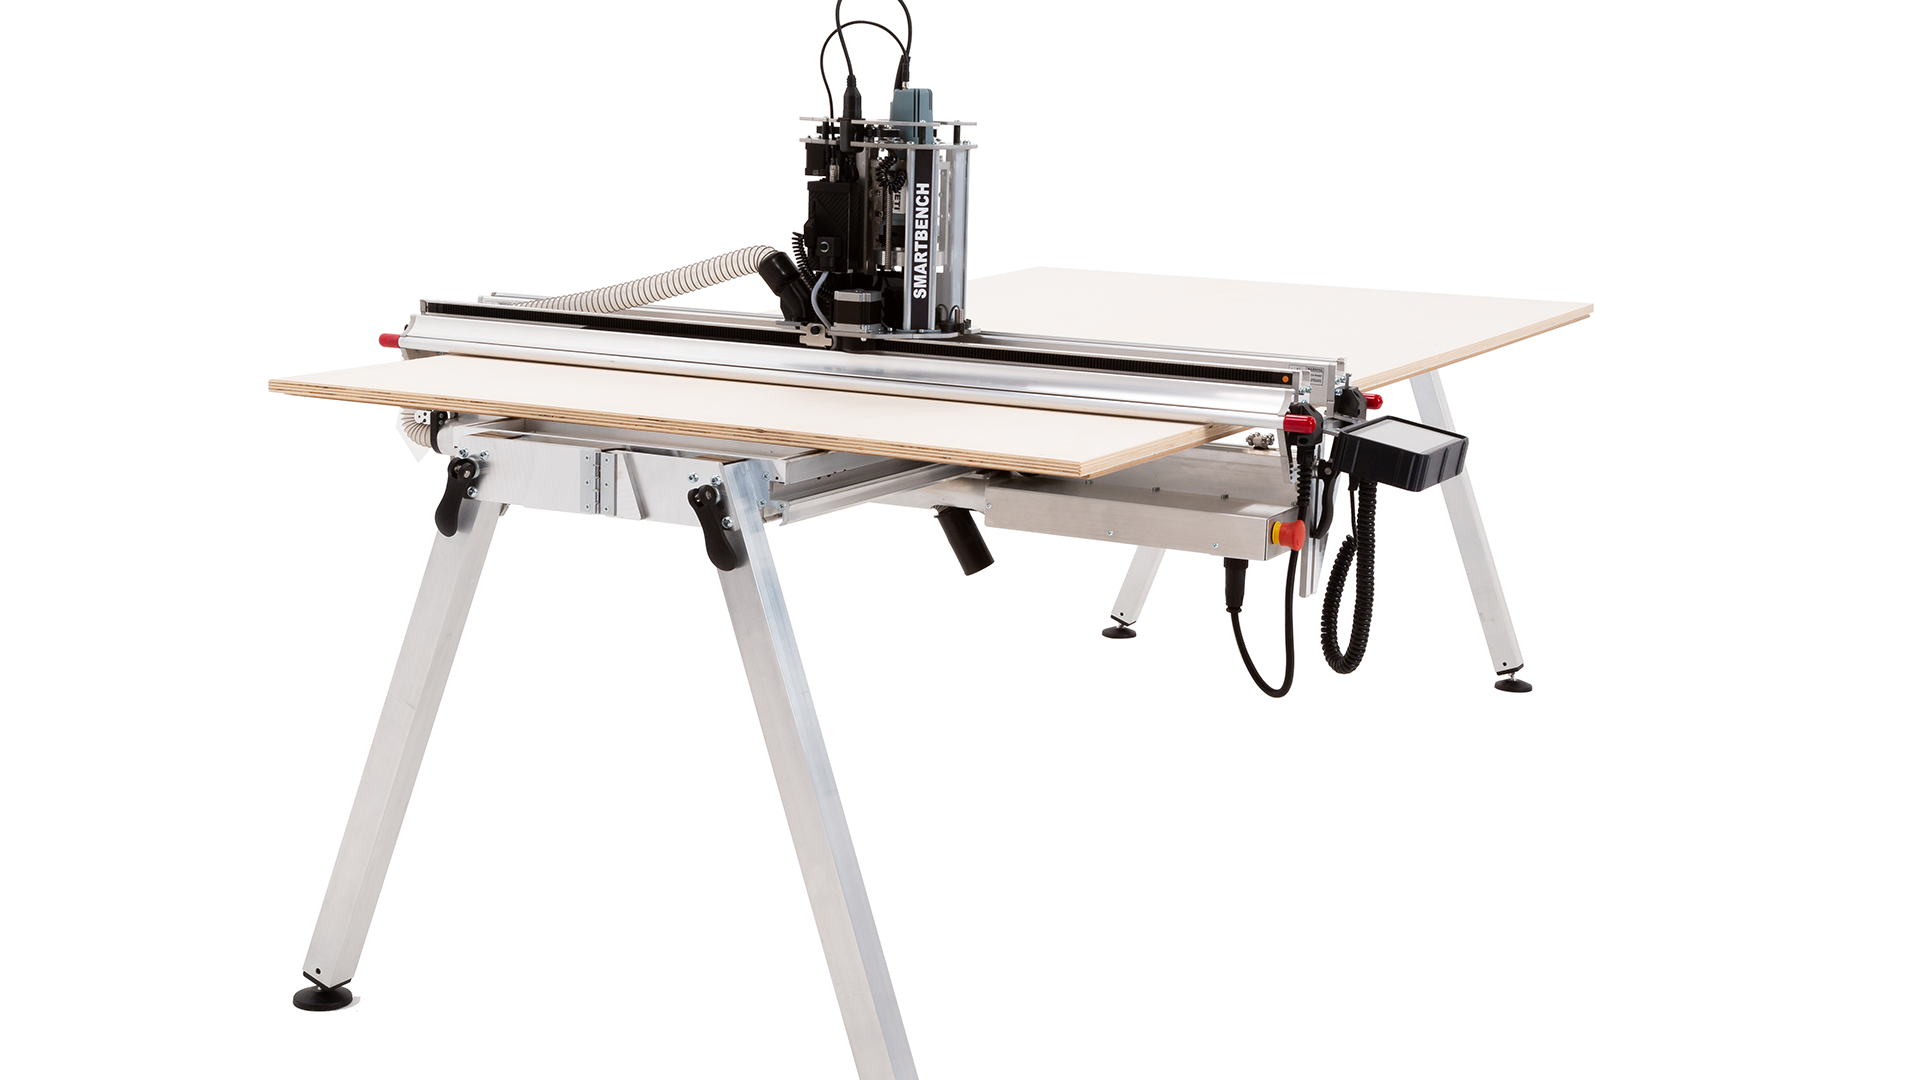 New Trend Yeti CNC SmartBench is the Coolest Machine on the Market